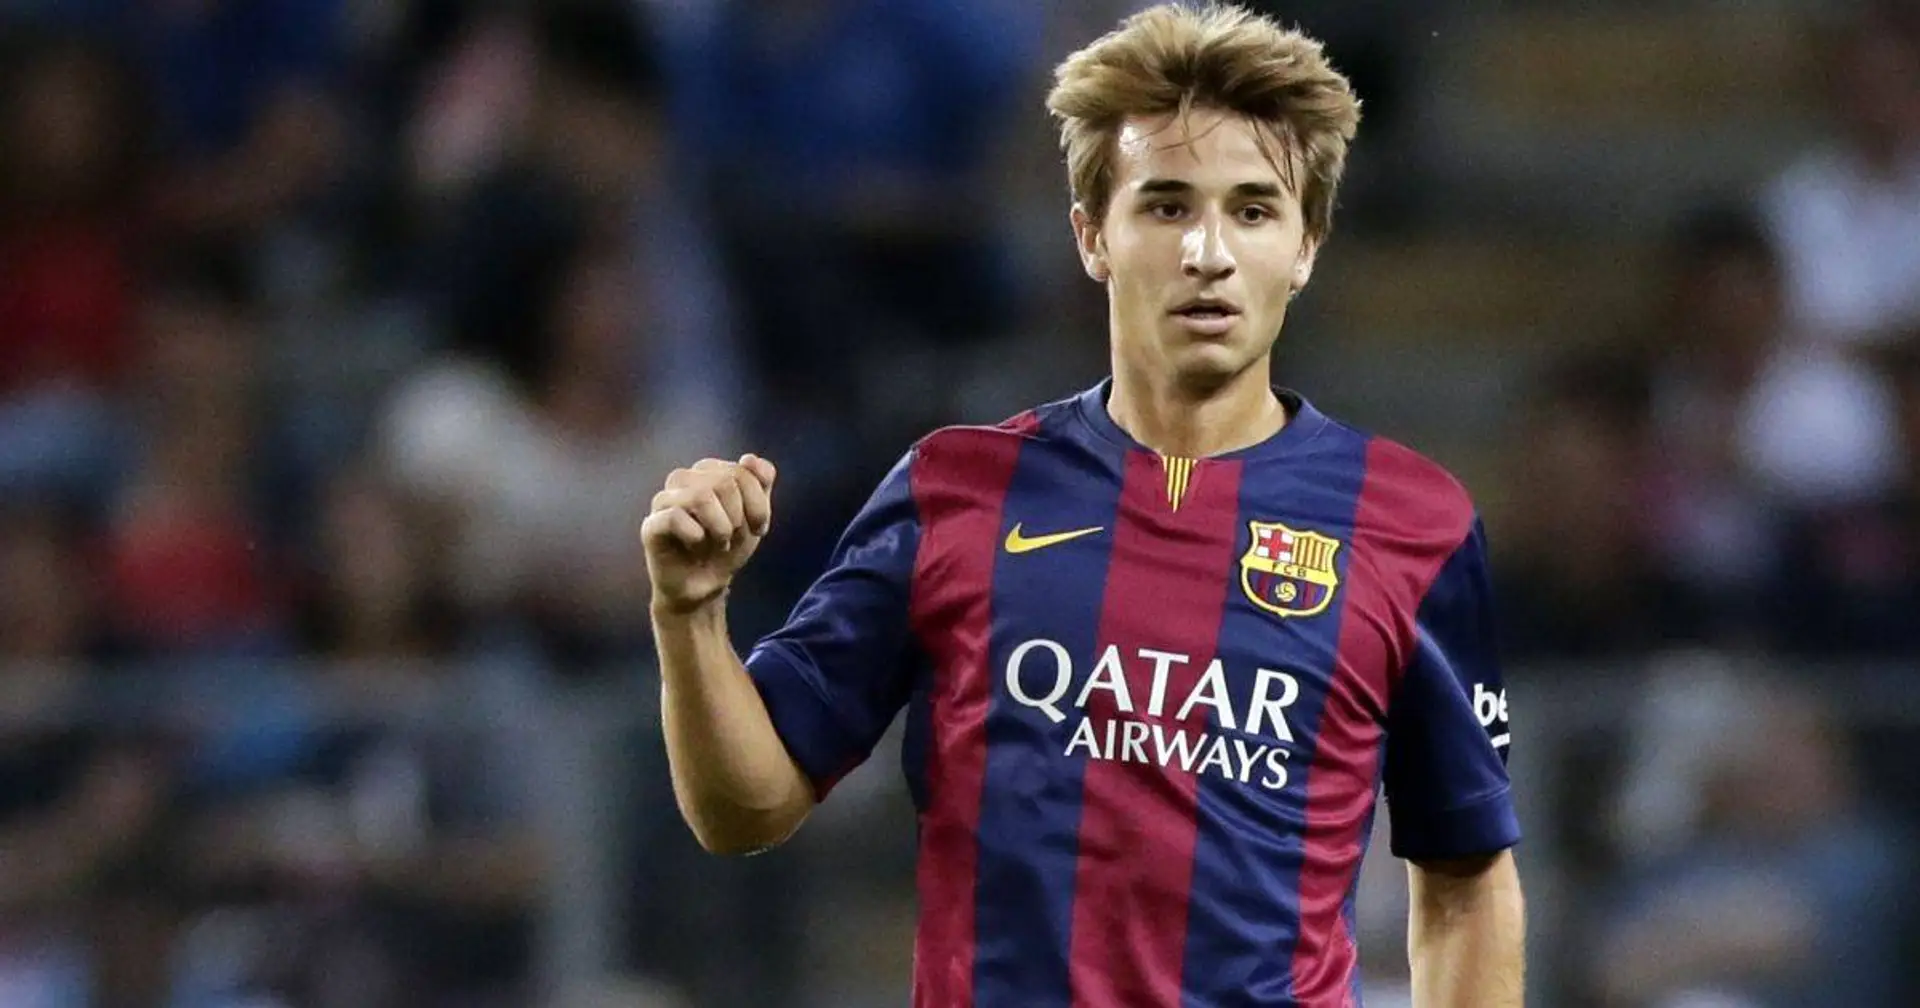 'The stage is over but I never close the door for the club I love' Sergi Samper on Barca return